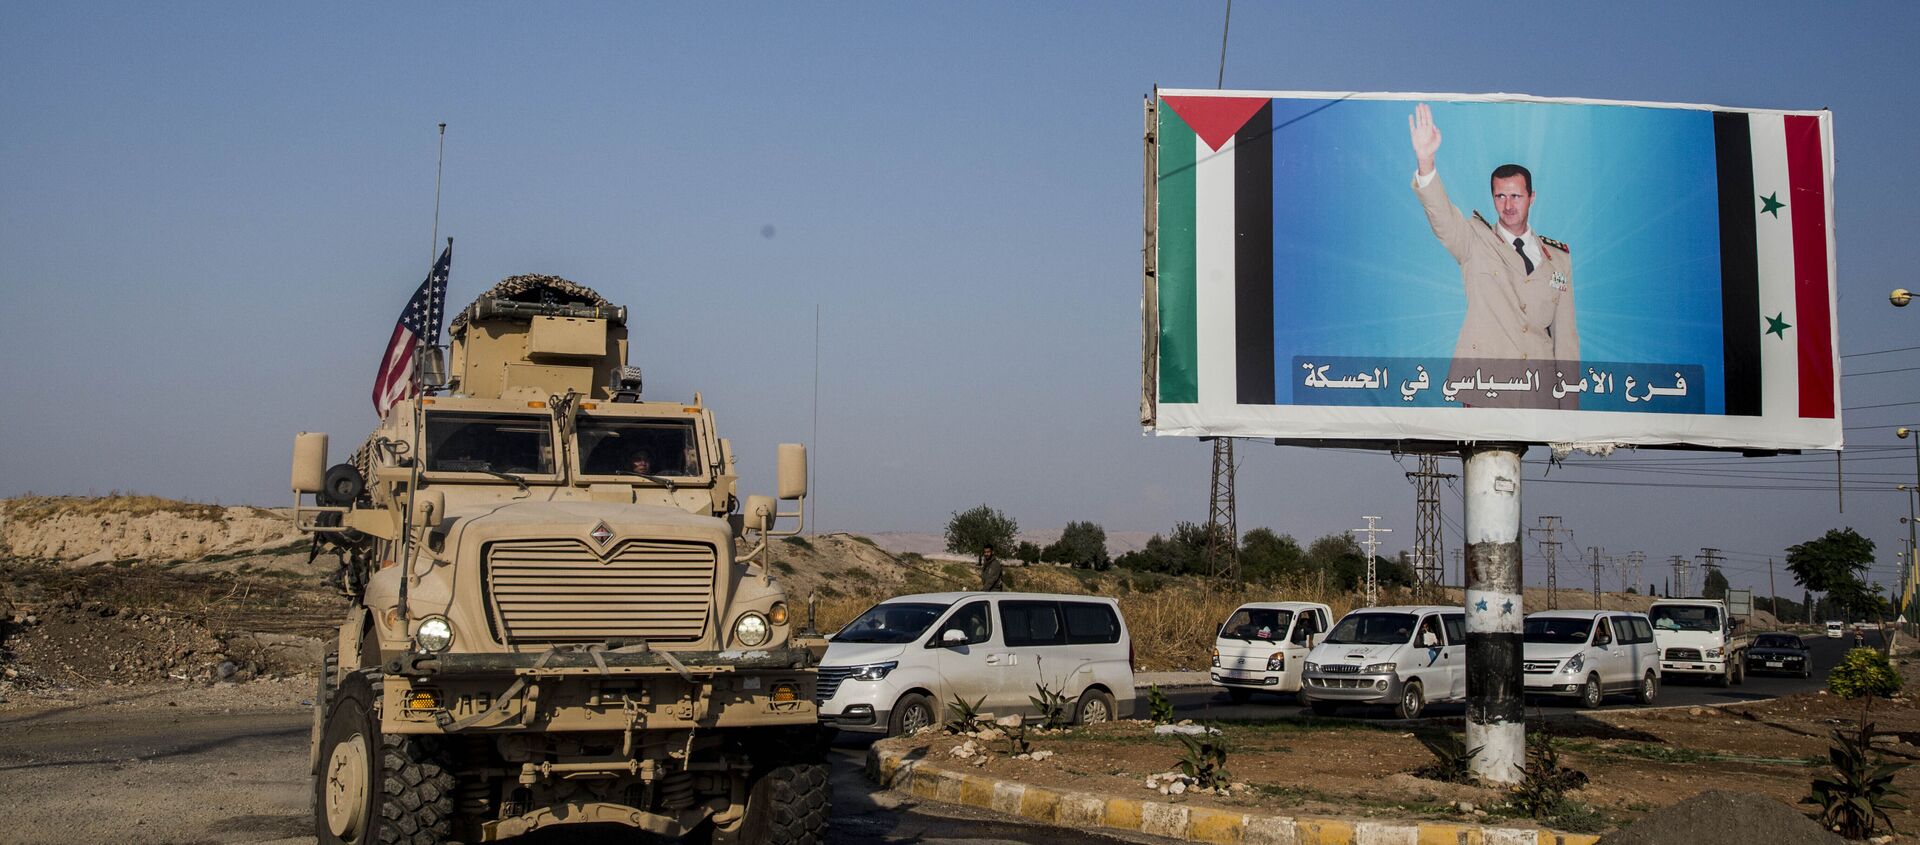 FILE - In this Saturday, 26 October 2019 file photo, a US military vehicle drives south of the northeastern city of Qamishli, likely heading to the oil-rich Deir el-Zour area where there are oil fields, or possibly to another base nearby, as it passes by a poster showing Syrian President Bashar Assad. - Sputnik International, 1920, 13.10.2020